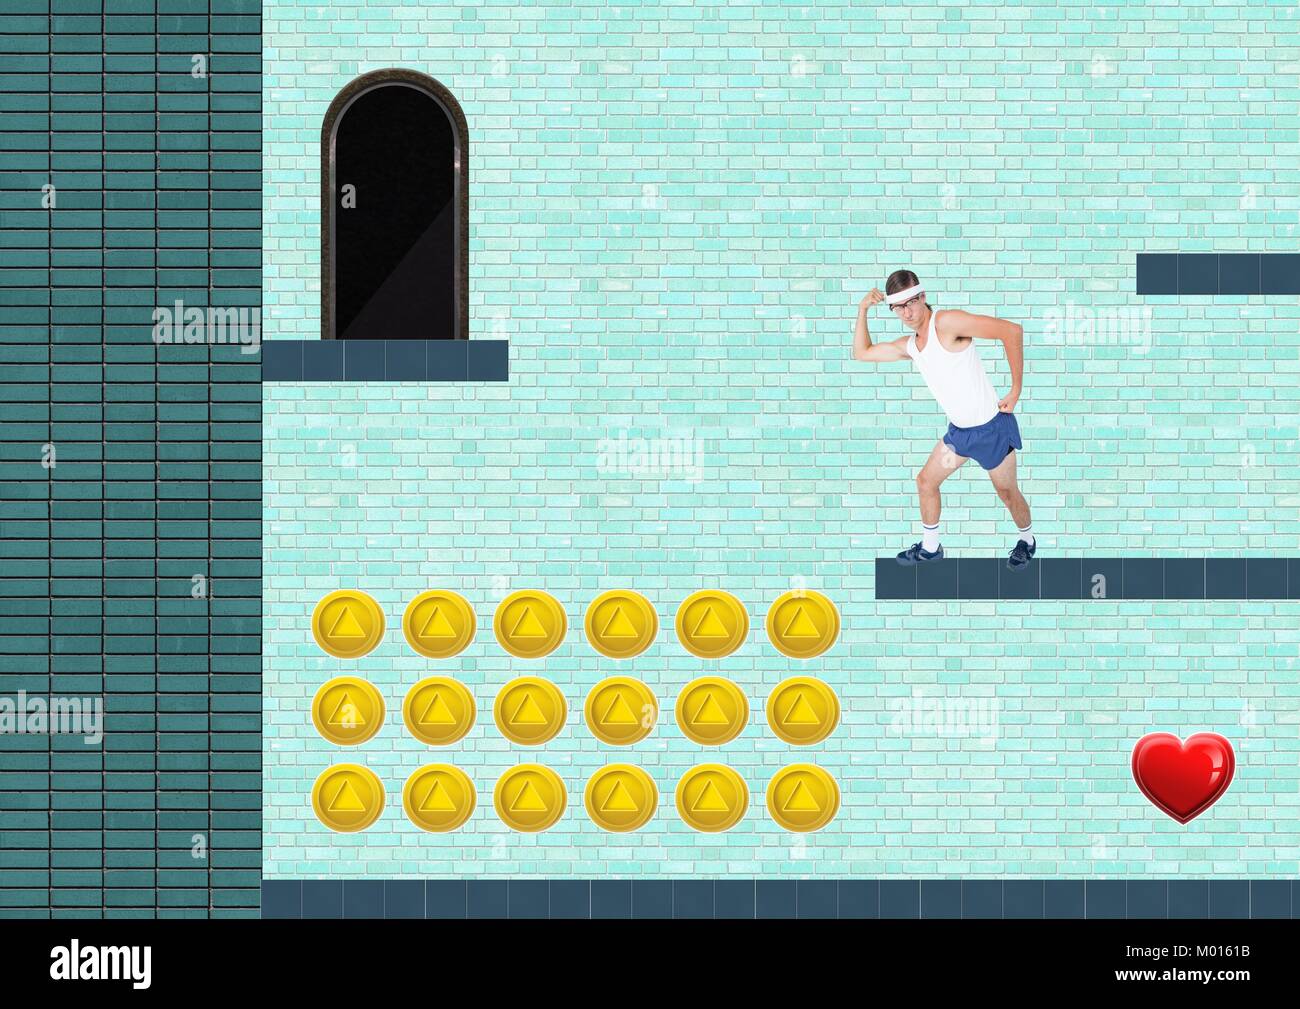 Fit man in Computer Game Level with coins and heart Stock Photo